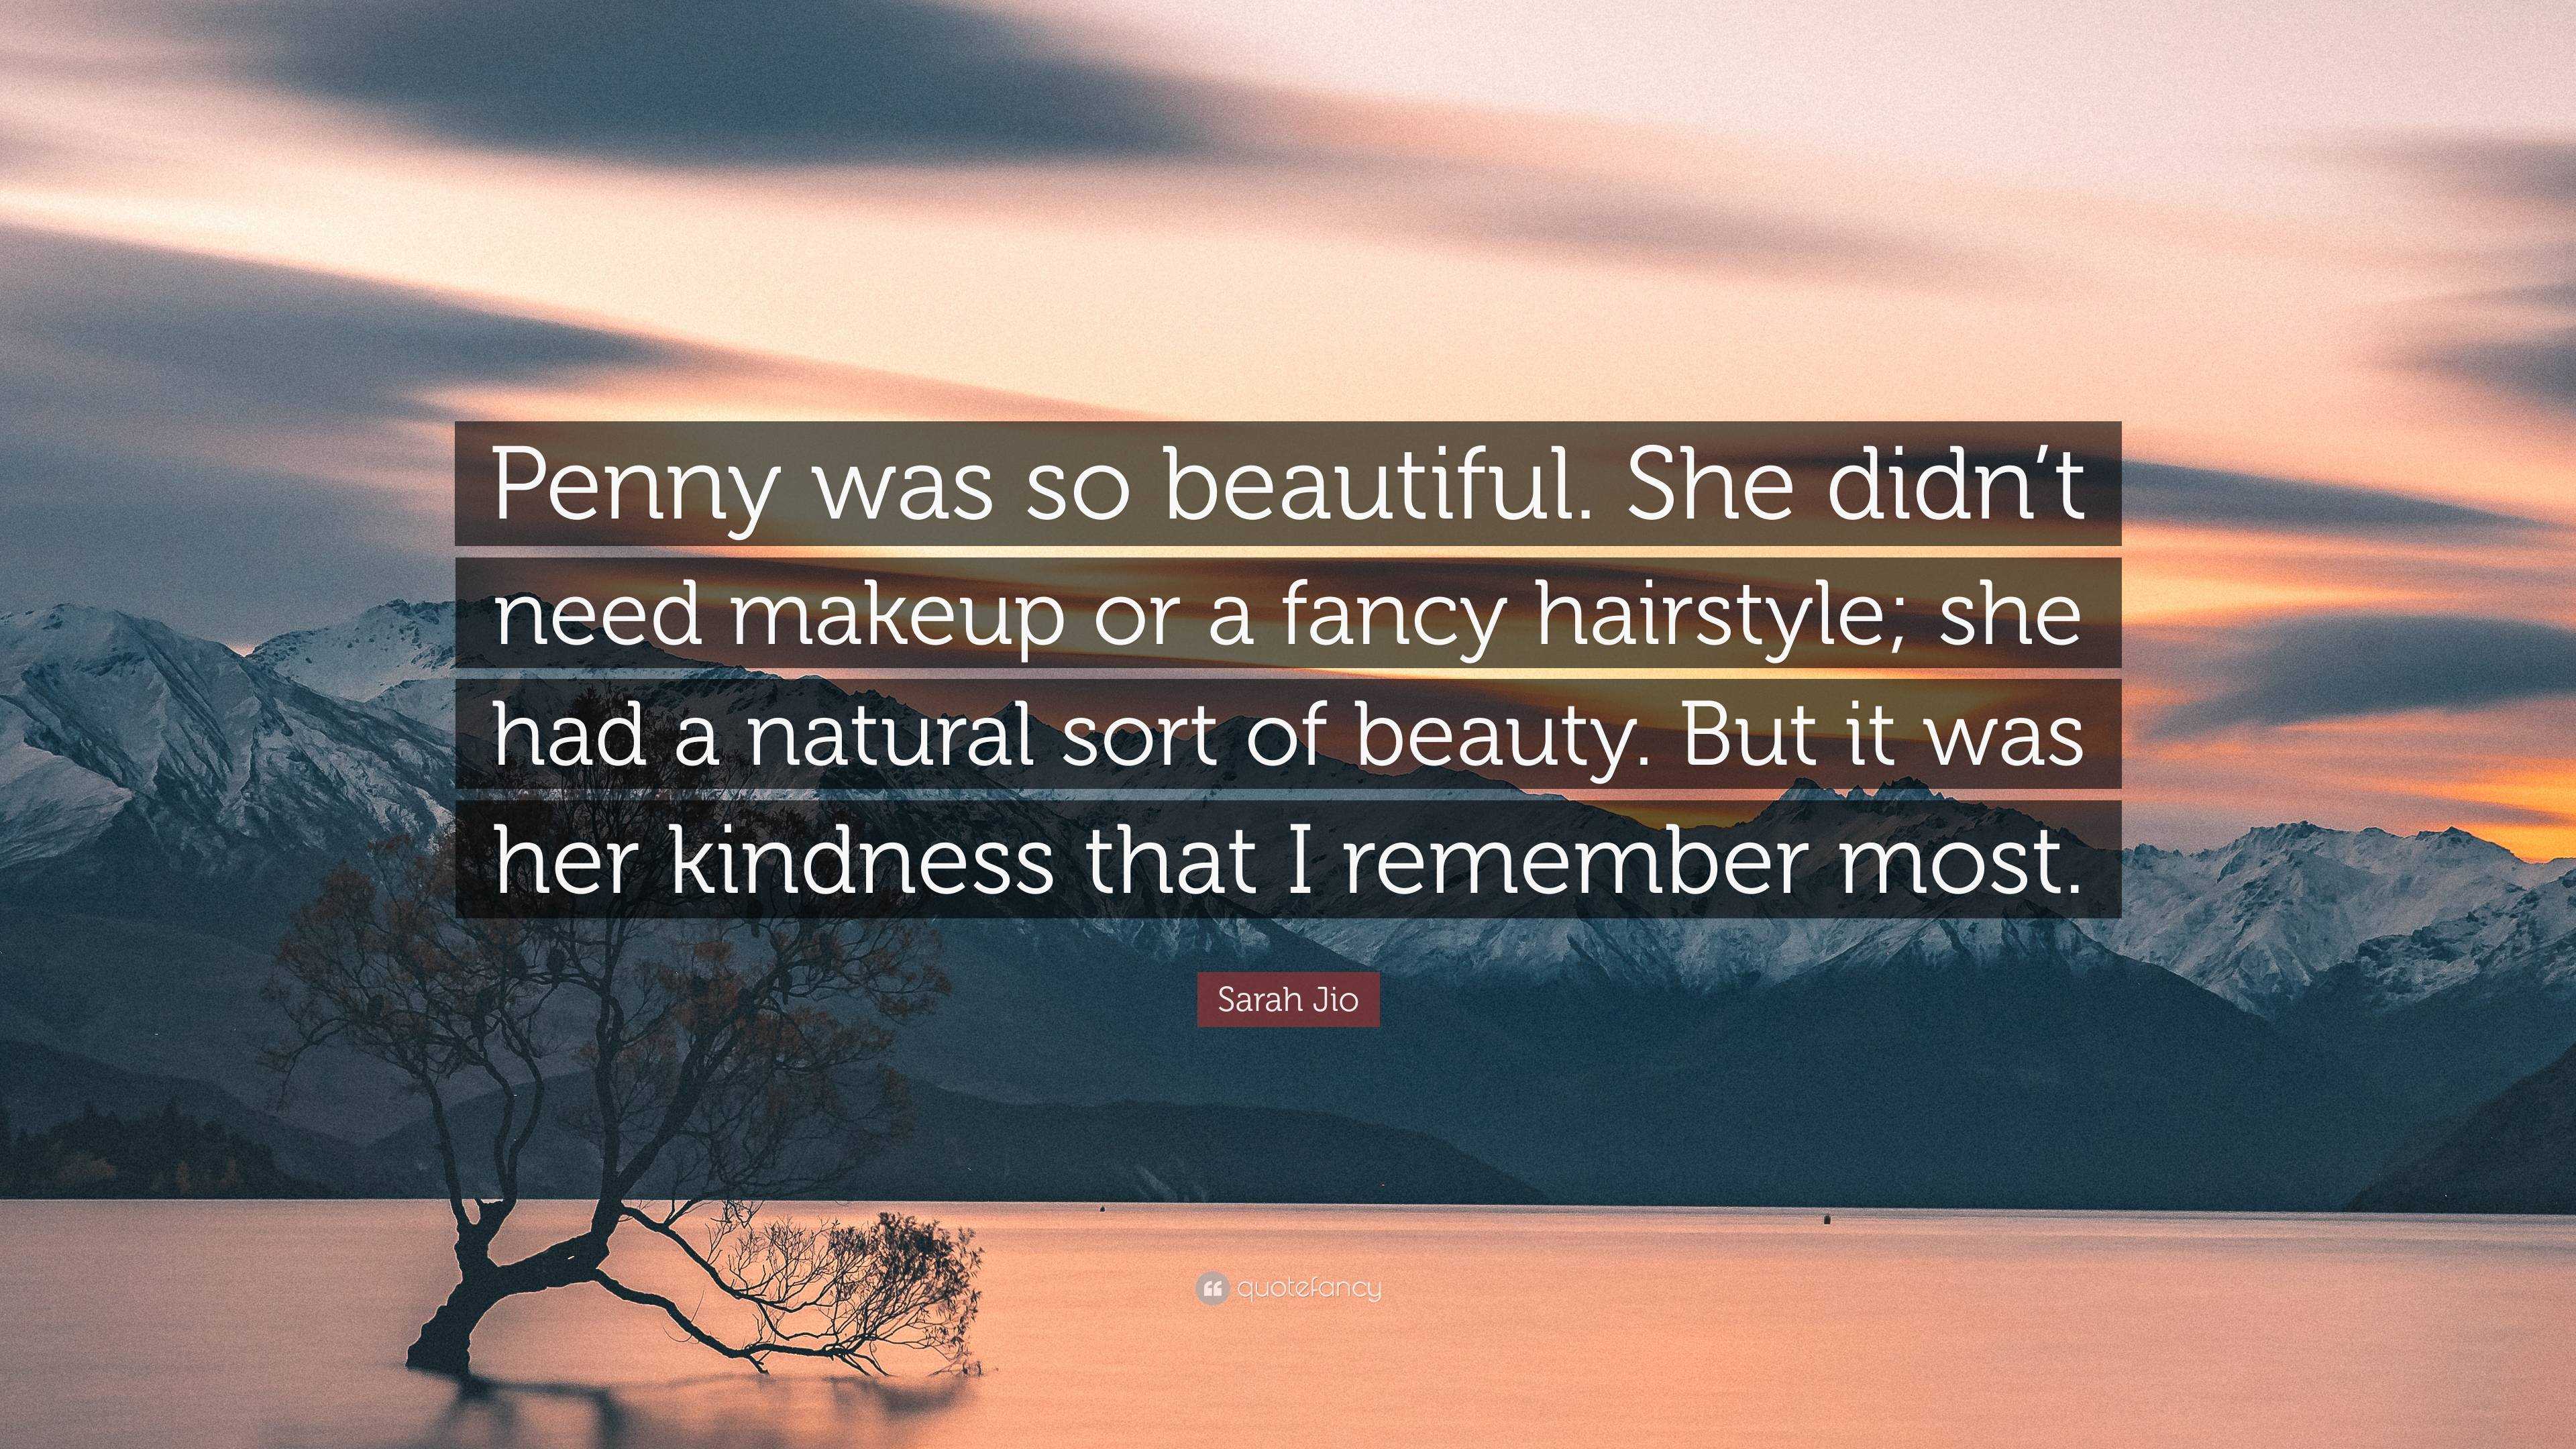 Sarah Jio Quote: “Penny was so beautiful. She didn't need makeup or a fancy  hairstyle; she had a natural sort of beauty. But it was her ki...”